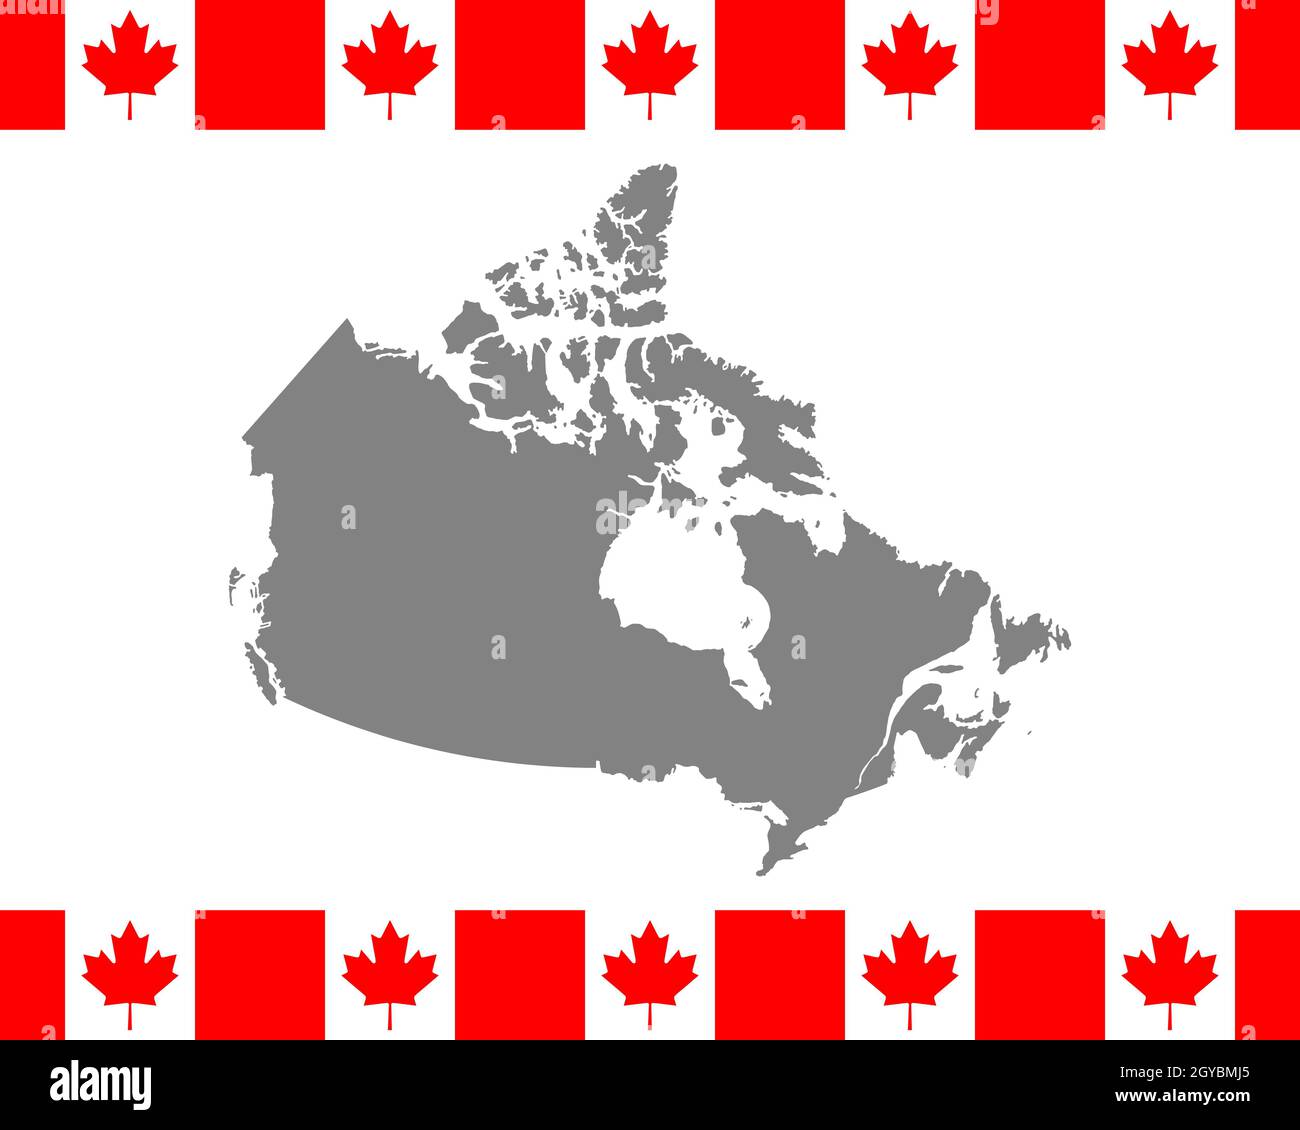 Canadian flag and map Stock Photo